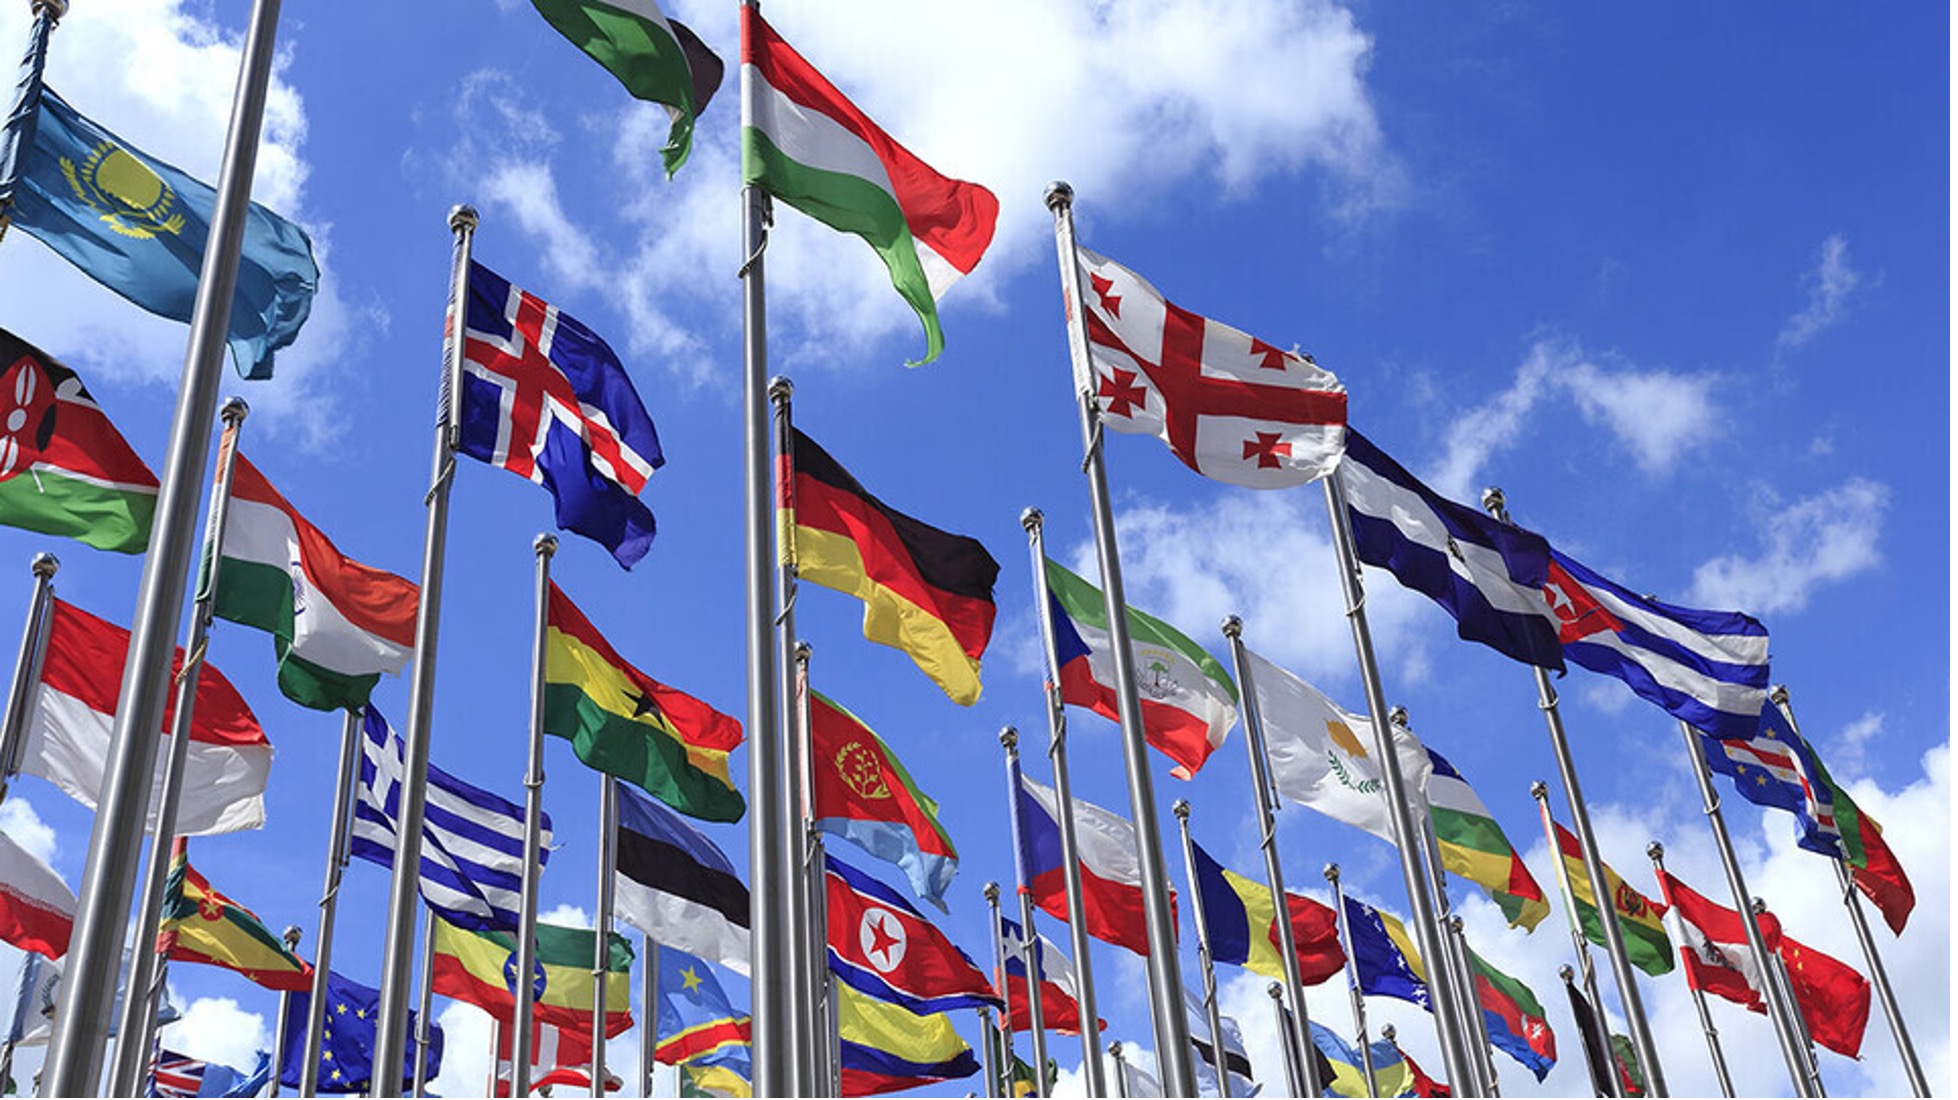 Flags from around the world hang outside.